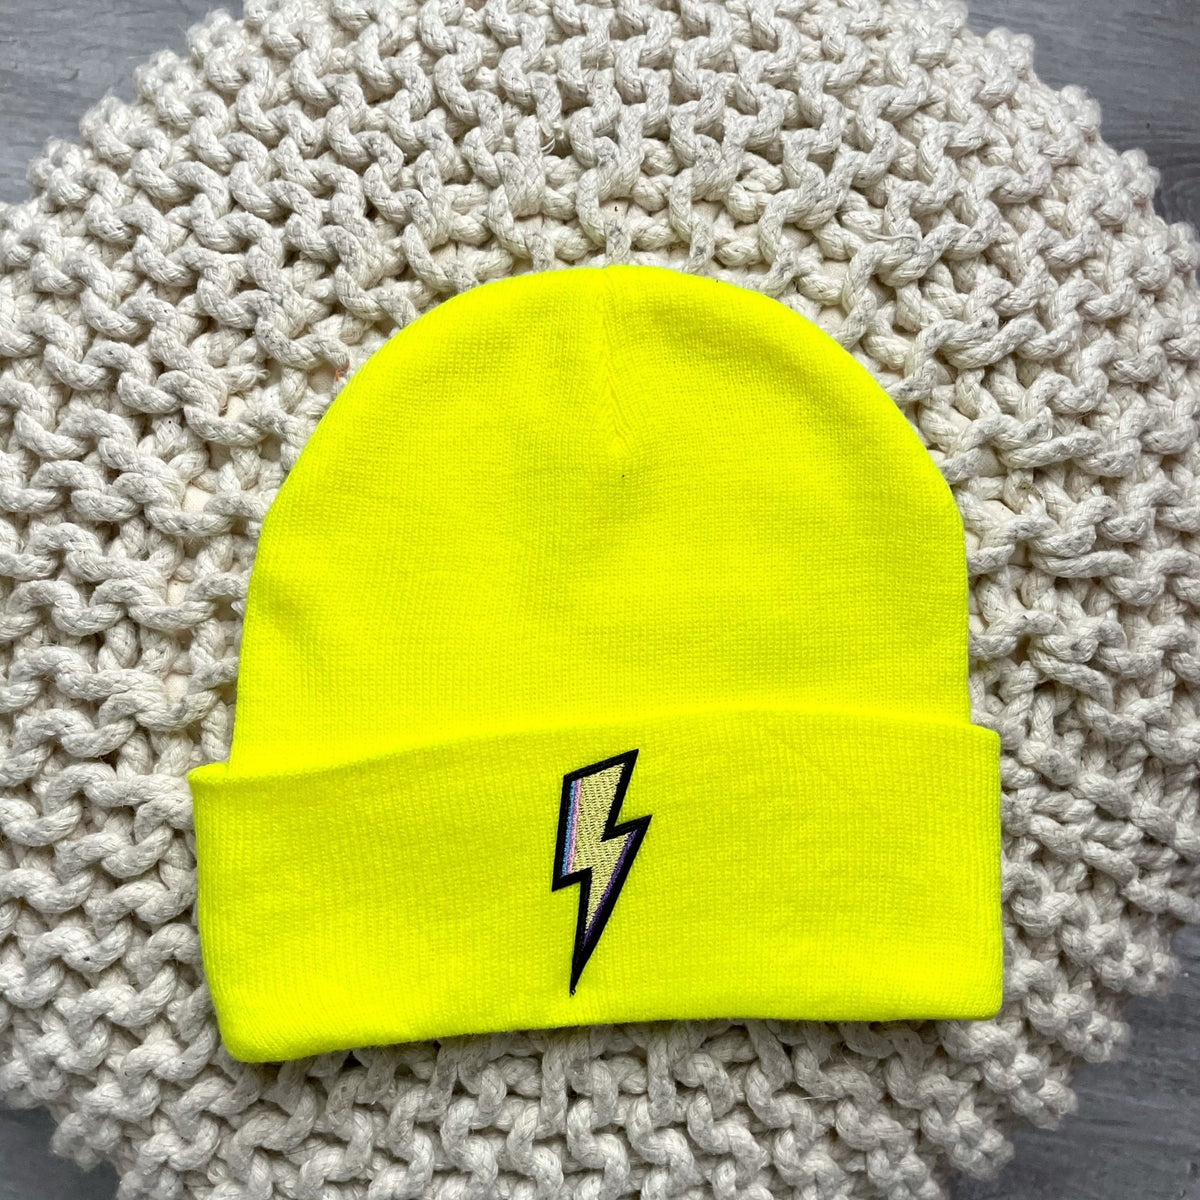 Bolt beanie yellow - Trendy Beanies at Lush Fashion Lounge Boutique in Oklahoma City